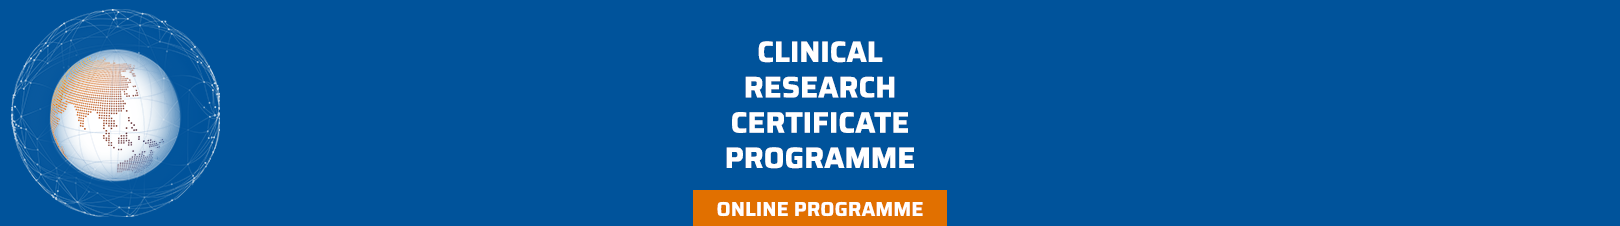 Clinical Research Certificate Programme 